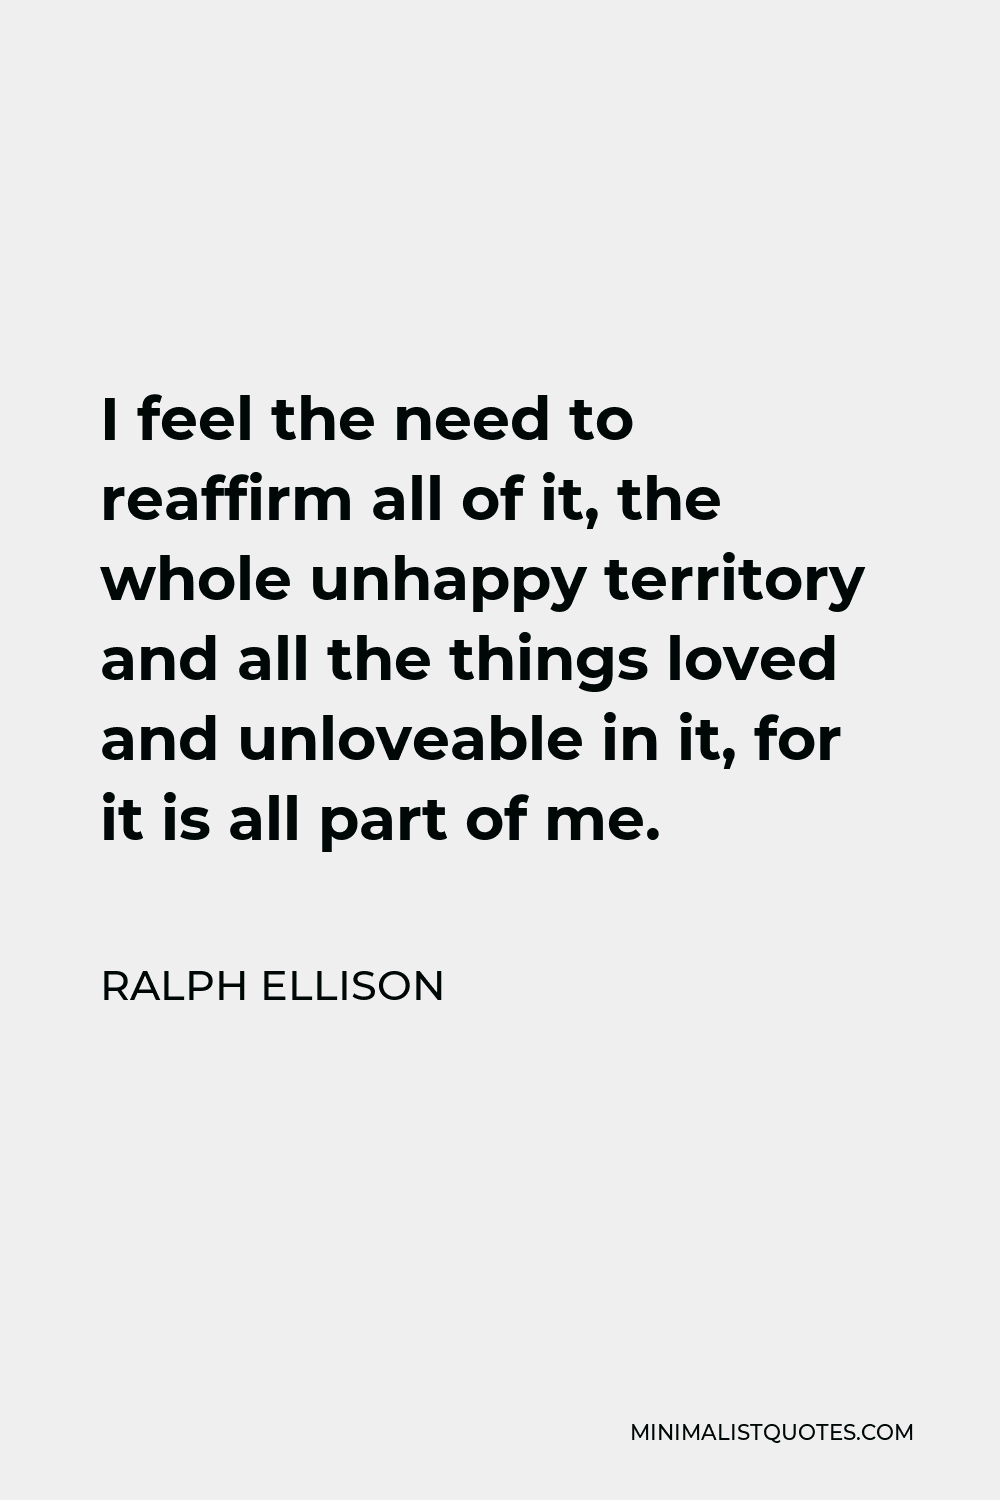 Ralph Ellison Quote - I feel the need to reaffirm all of it, the whole unhappy territory and all the things loved and unloveable in it, for it is all part of me.